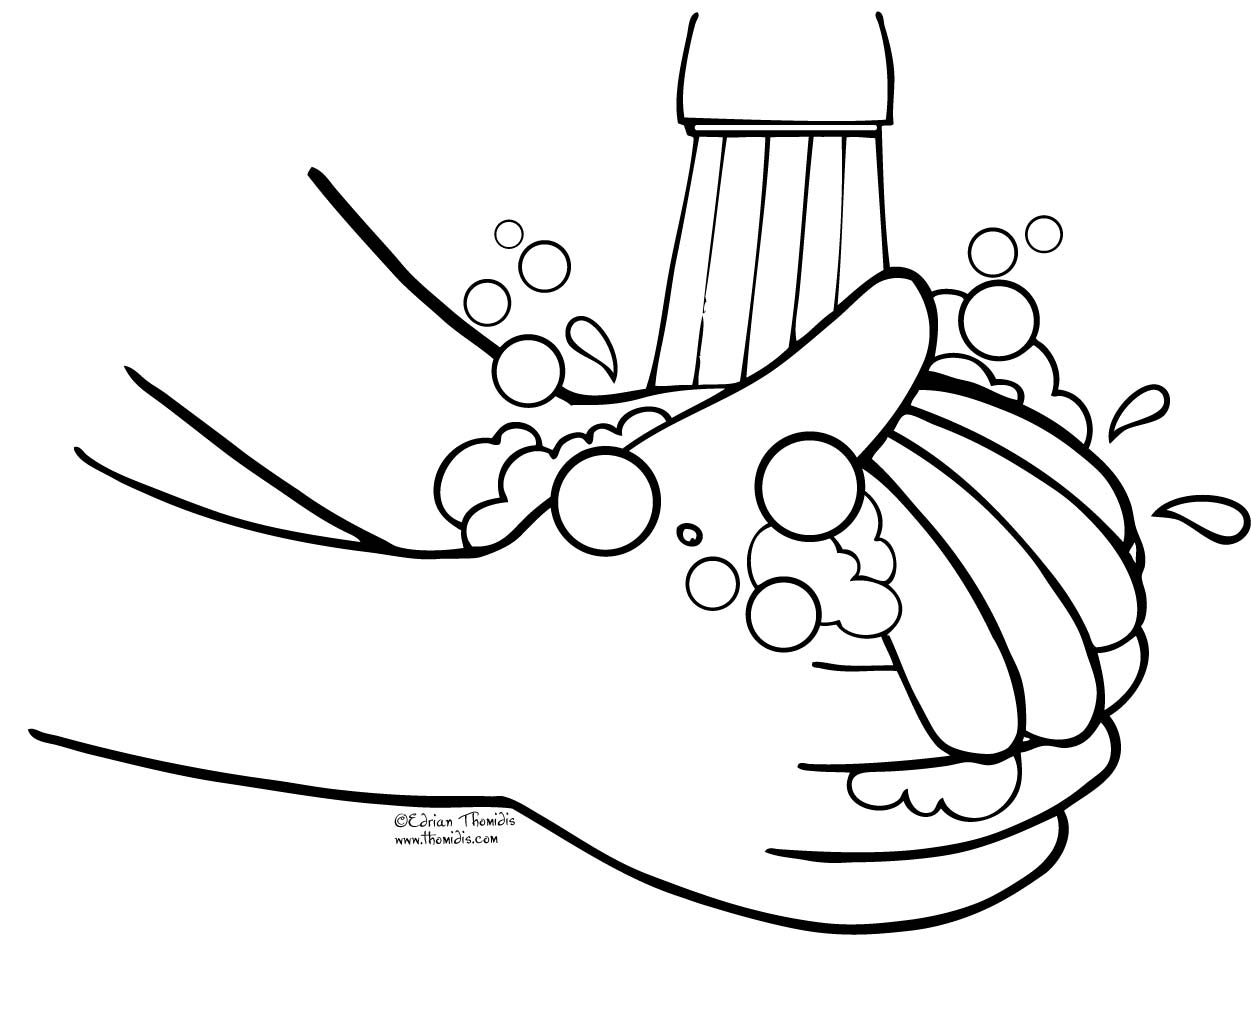 Washing hands clipart black and white 